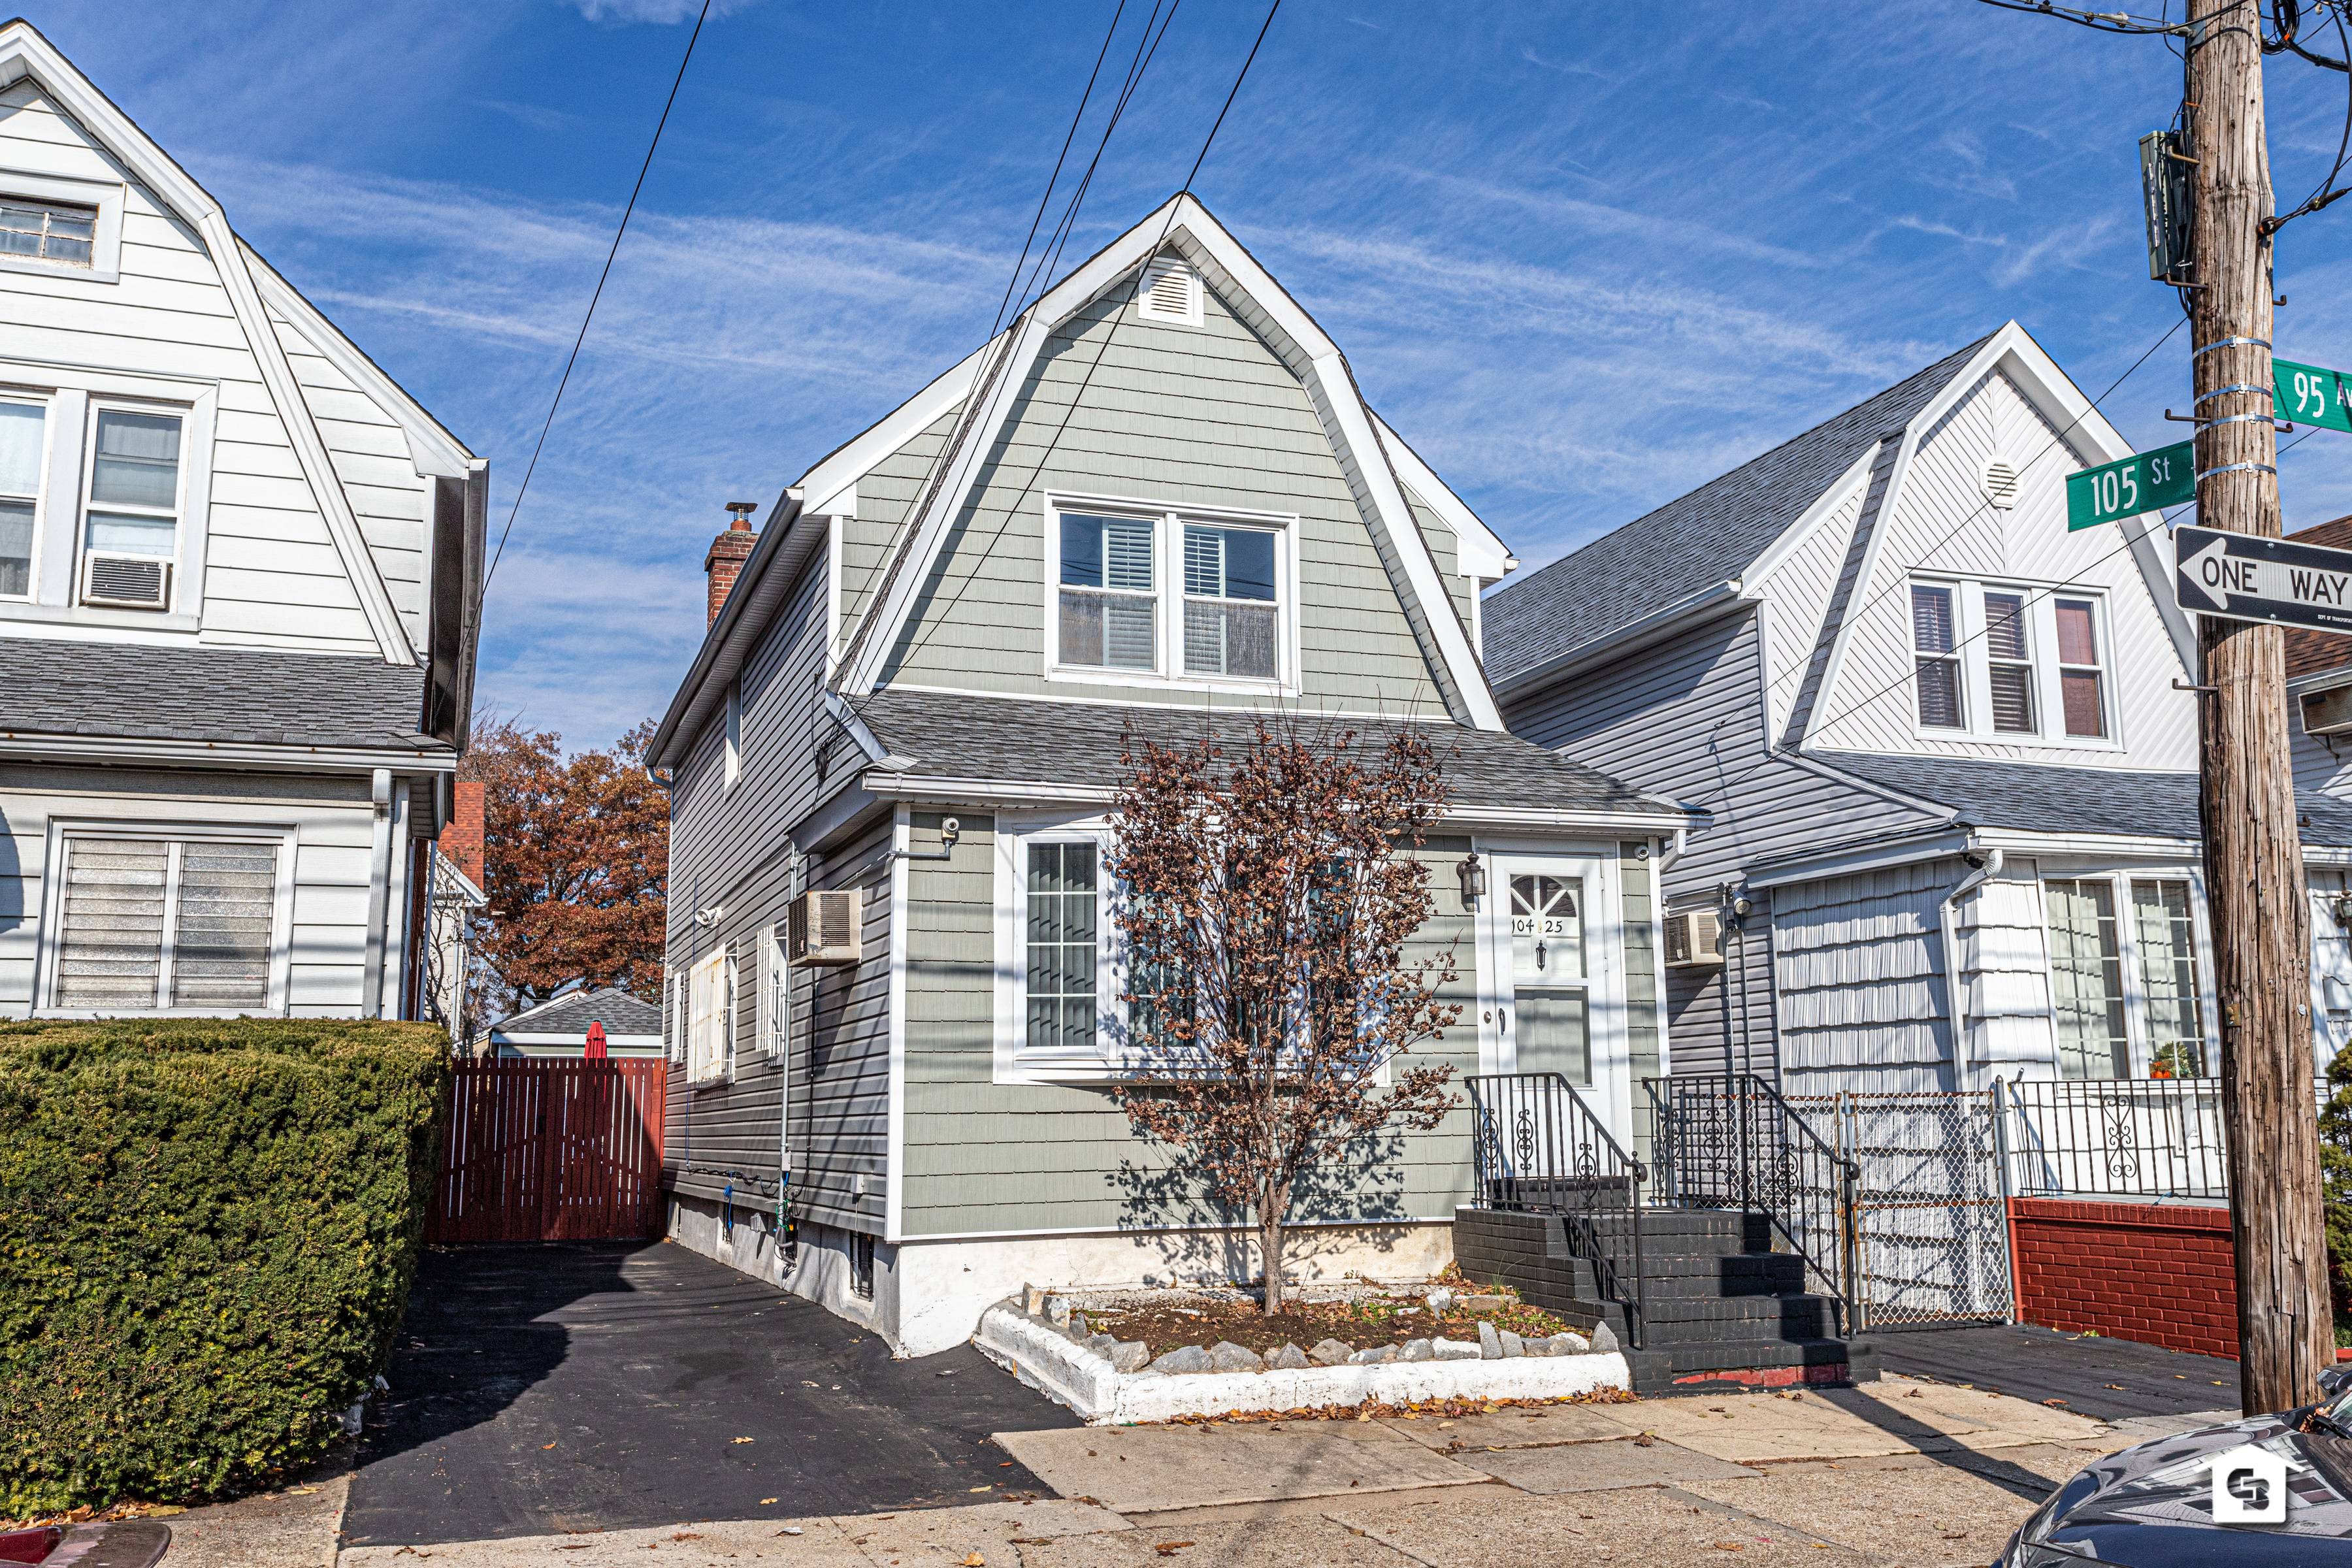 Open, airy, cozy and comfortable is this 2 family home used as a single family located in the heart of Ozone Park.